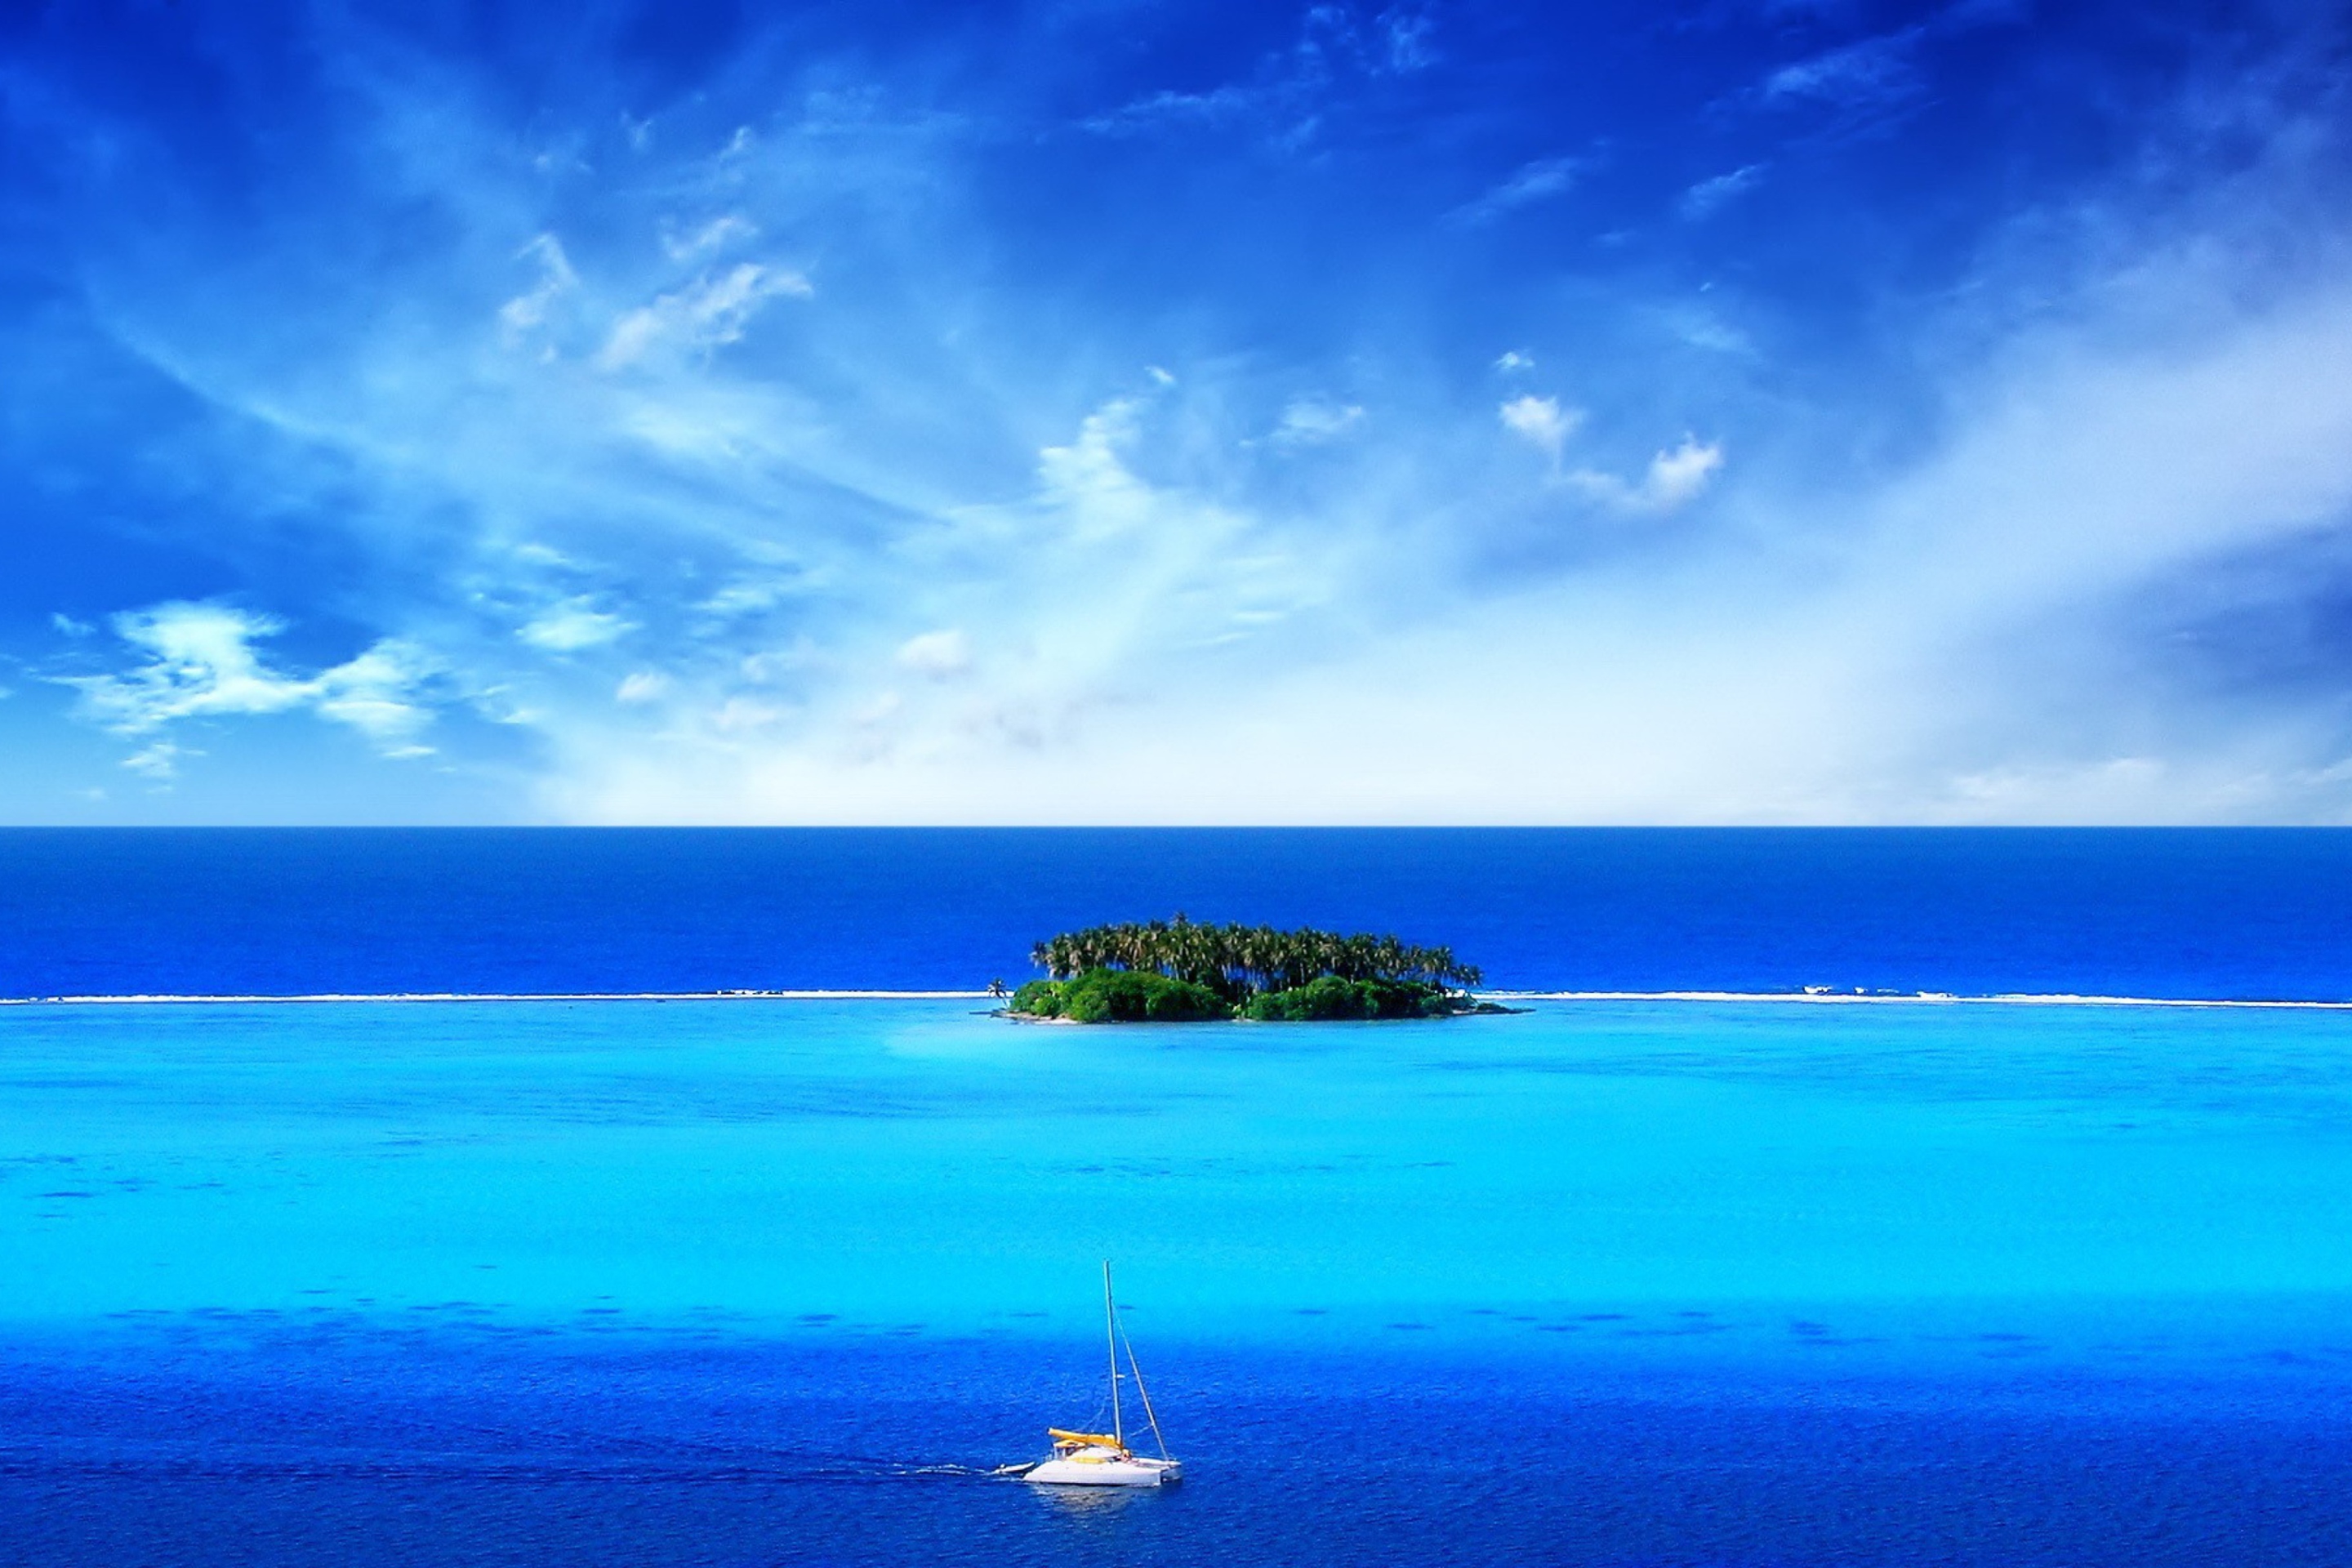 Green Island In Middle Of Blue Ocean And White Boat wallpaper 2880x1920